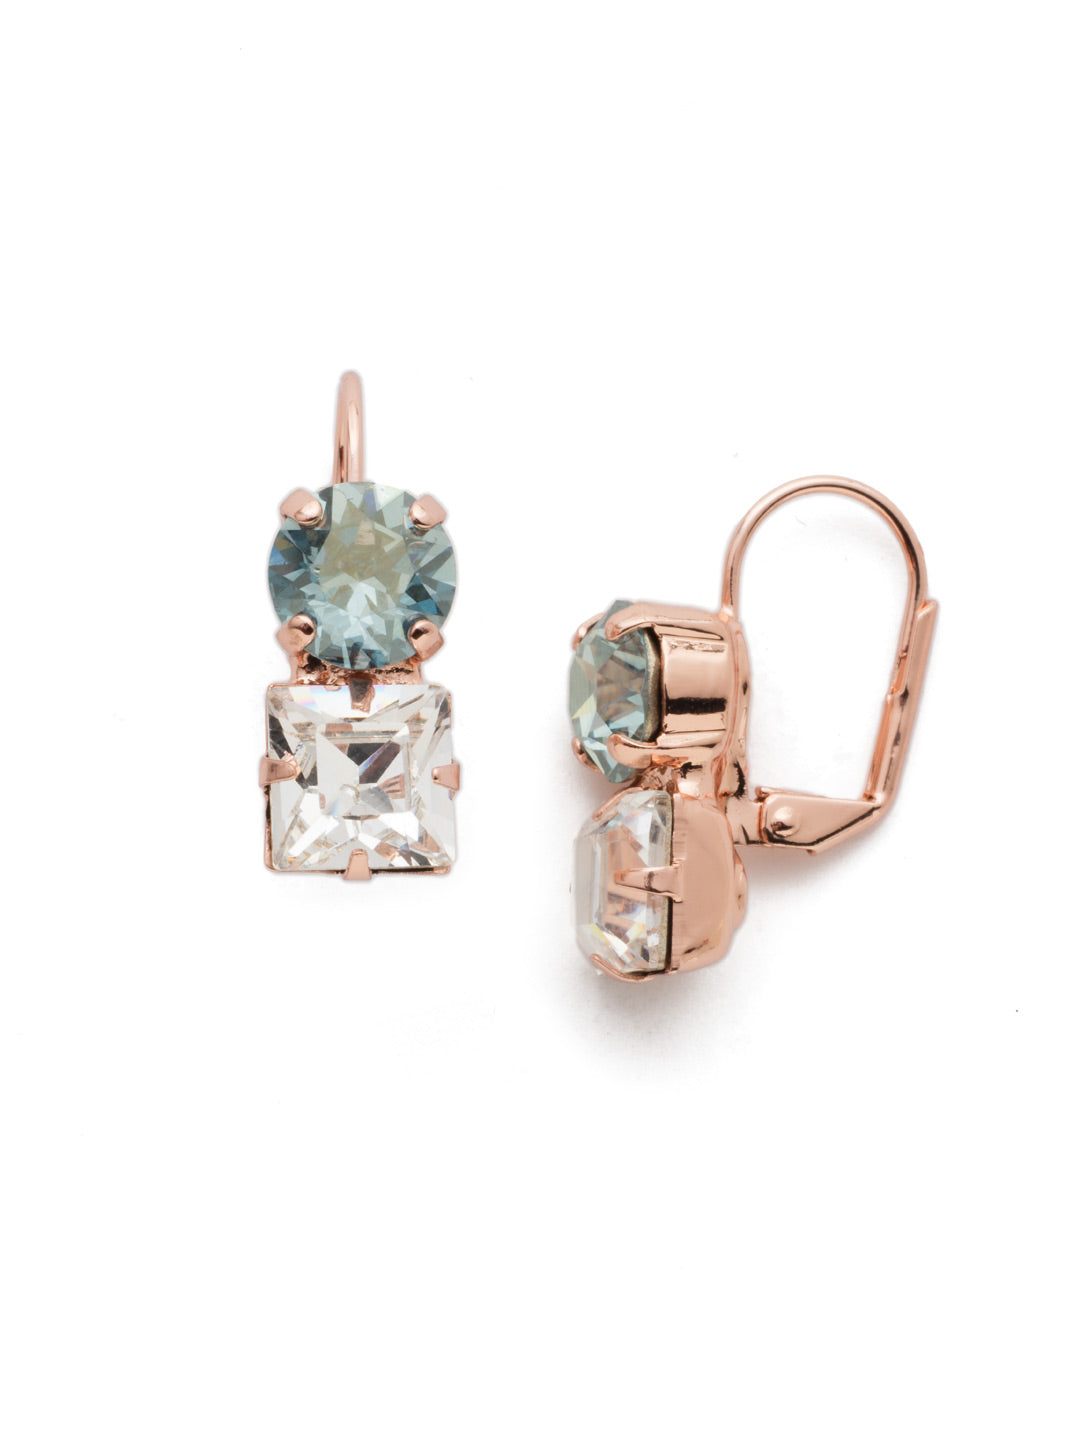 Mirabelle Dangle Earring - EEP51RGCAZ - The Mirabelle Dangle Earrings are outfit essentials for the sparkle lover. The cushion and round crystals are classics that can be worn anytime, any place. From Sorrelli's Crystal Azure collection in our Rose Gold-tone finish.